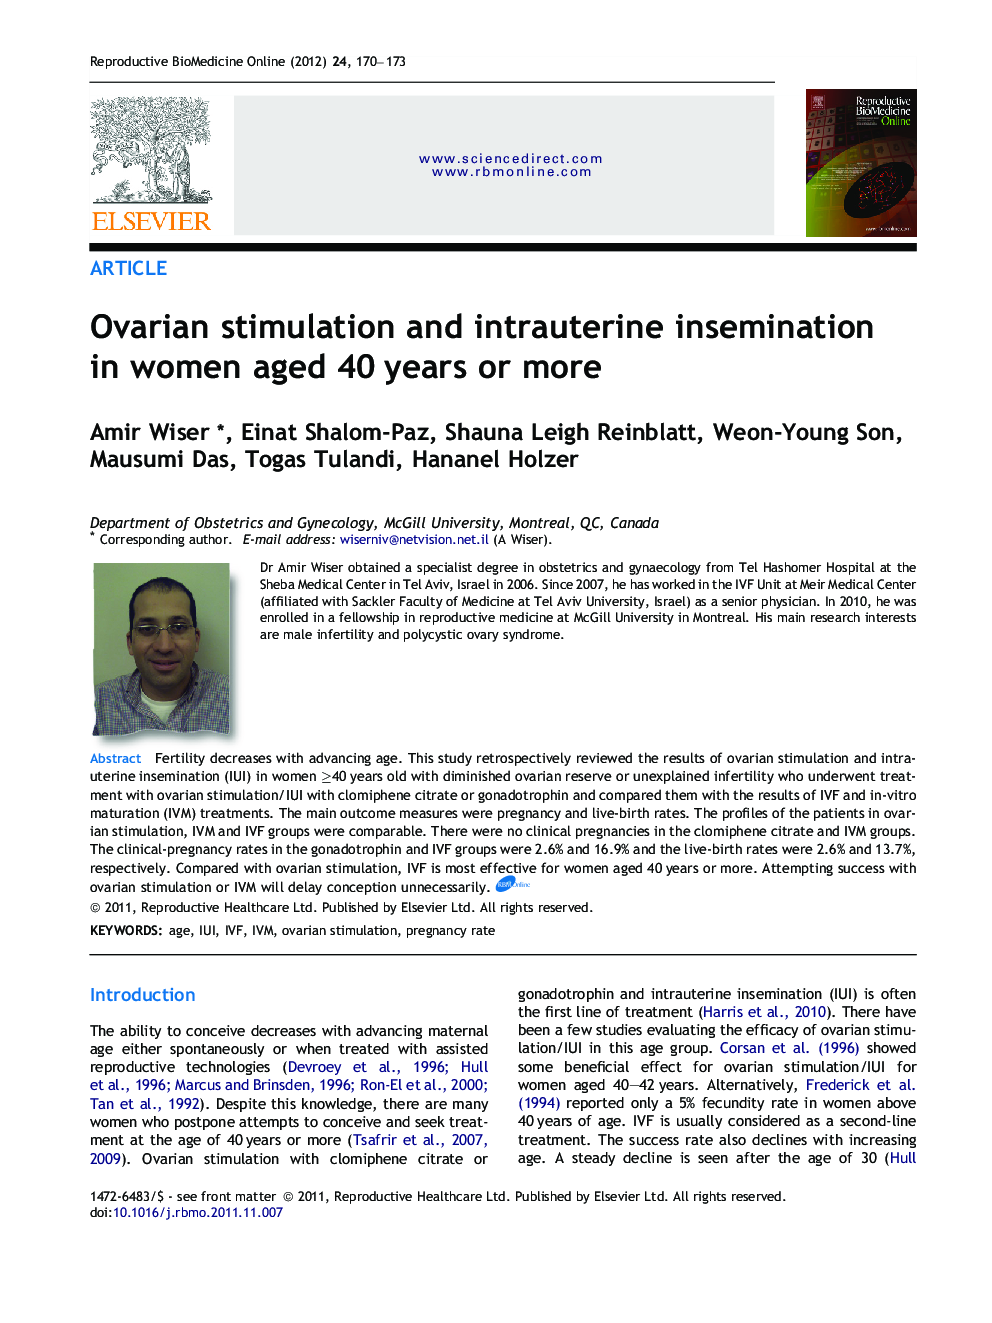 Ovarian stimulation and intrauterine insemination in women aged 40 years or more 